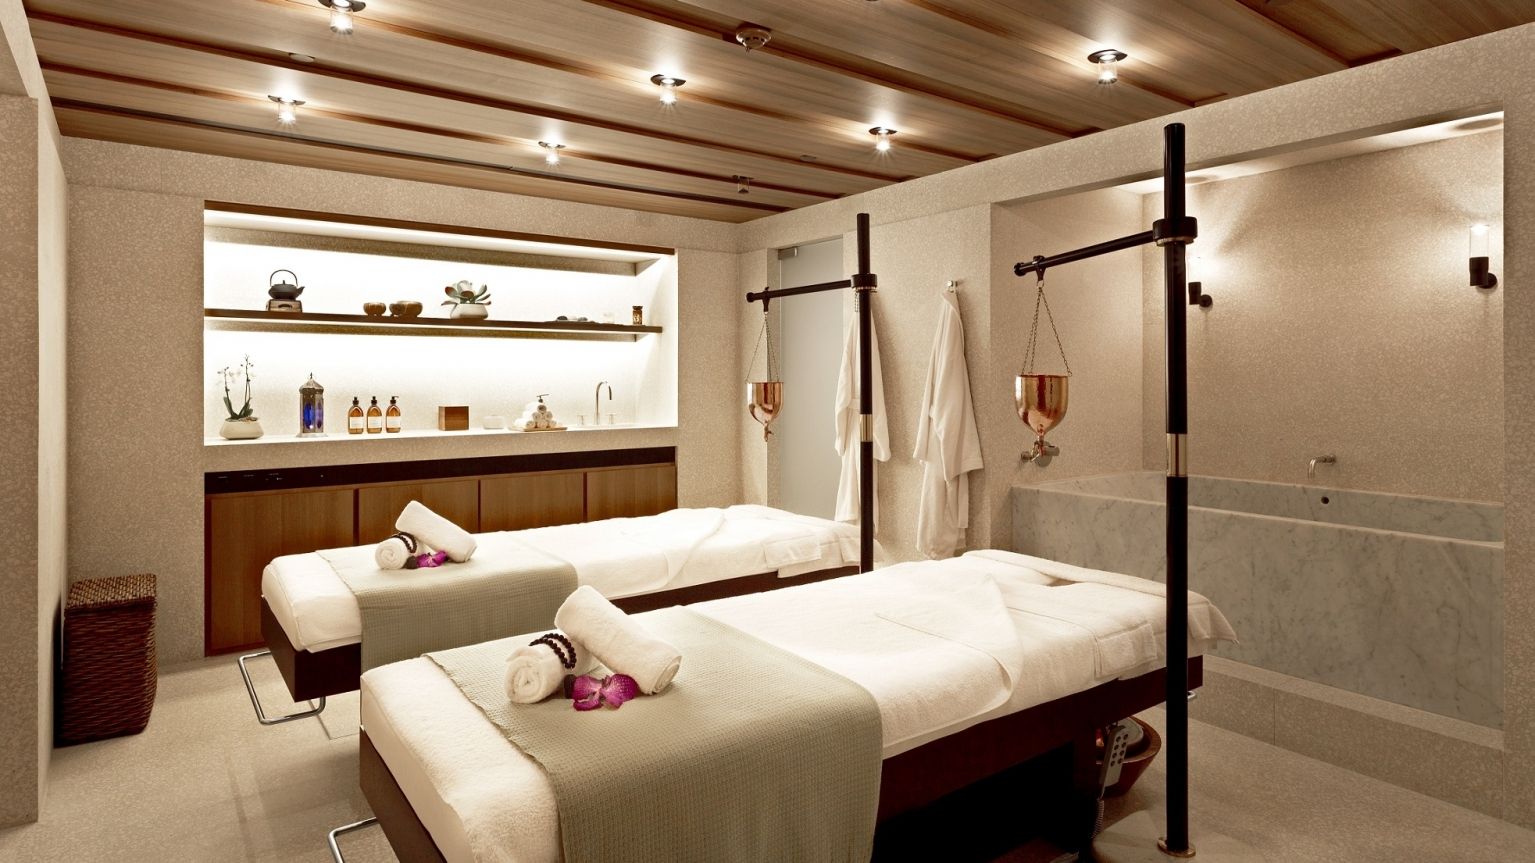 The spa at Akasha Holistic Wellbeing Centre in London